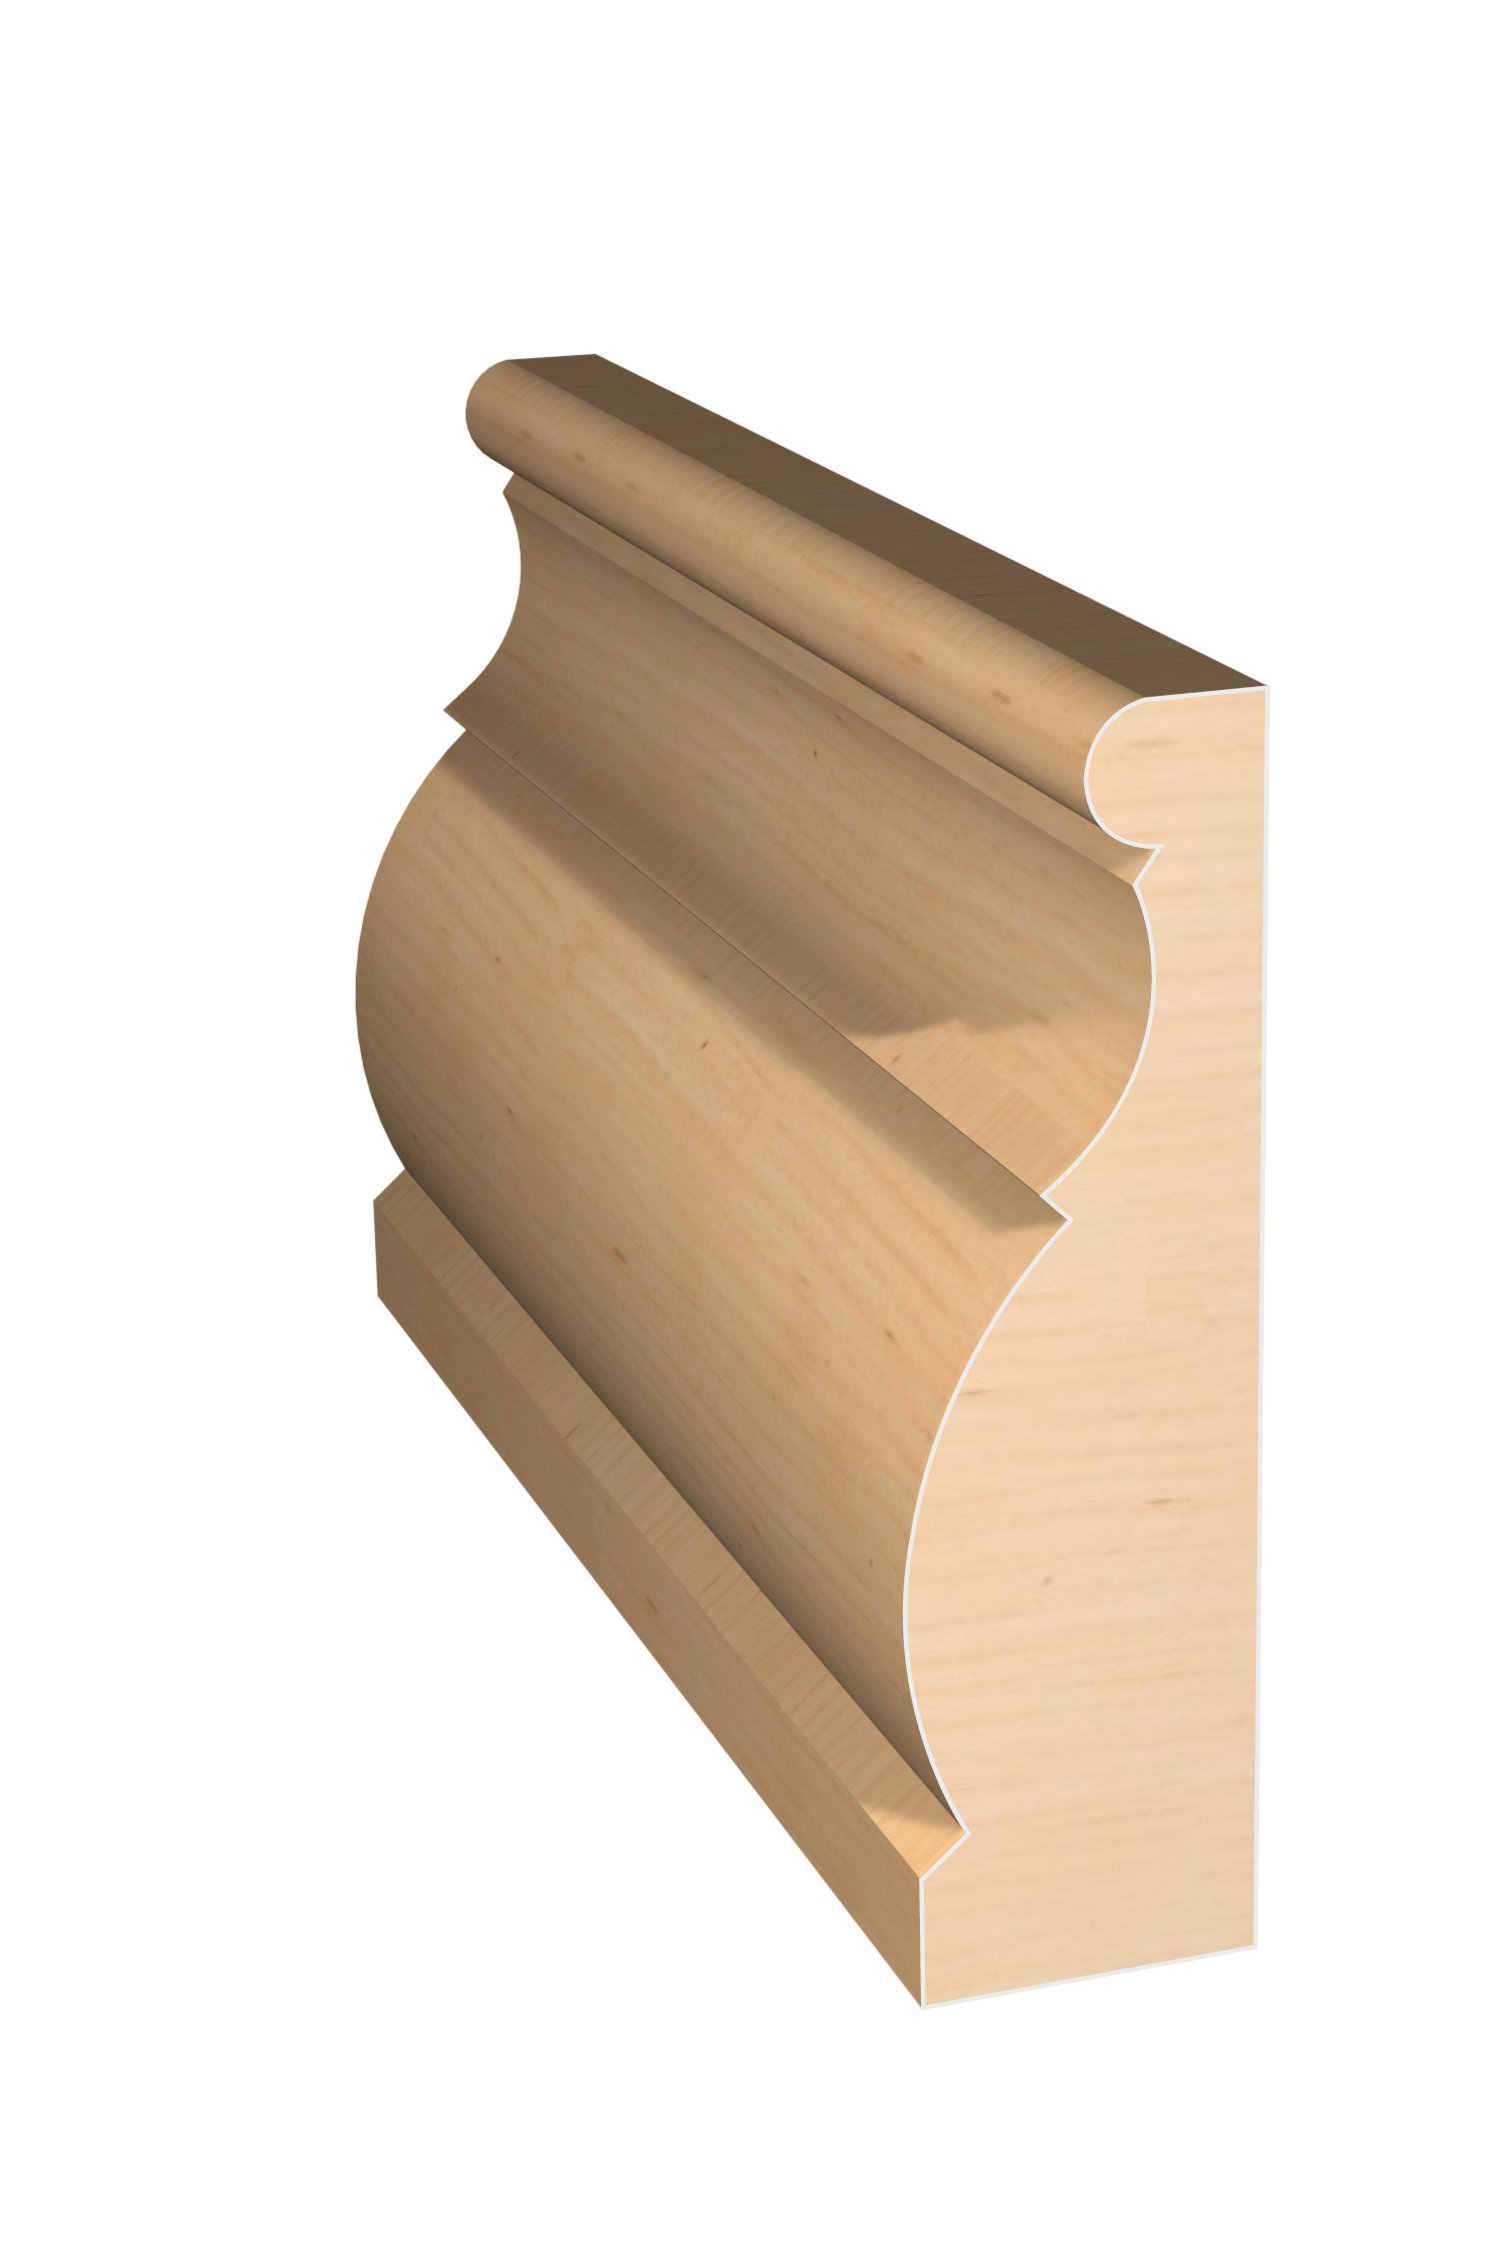 Three dimensional rendering of custom casing wood molding CAPL31214 made by Public Lumber Company in Detroit.